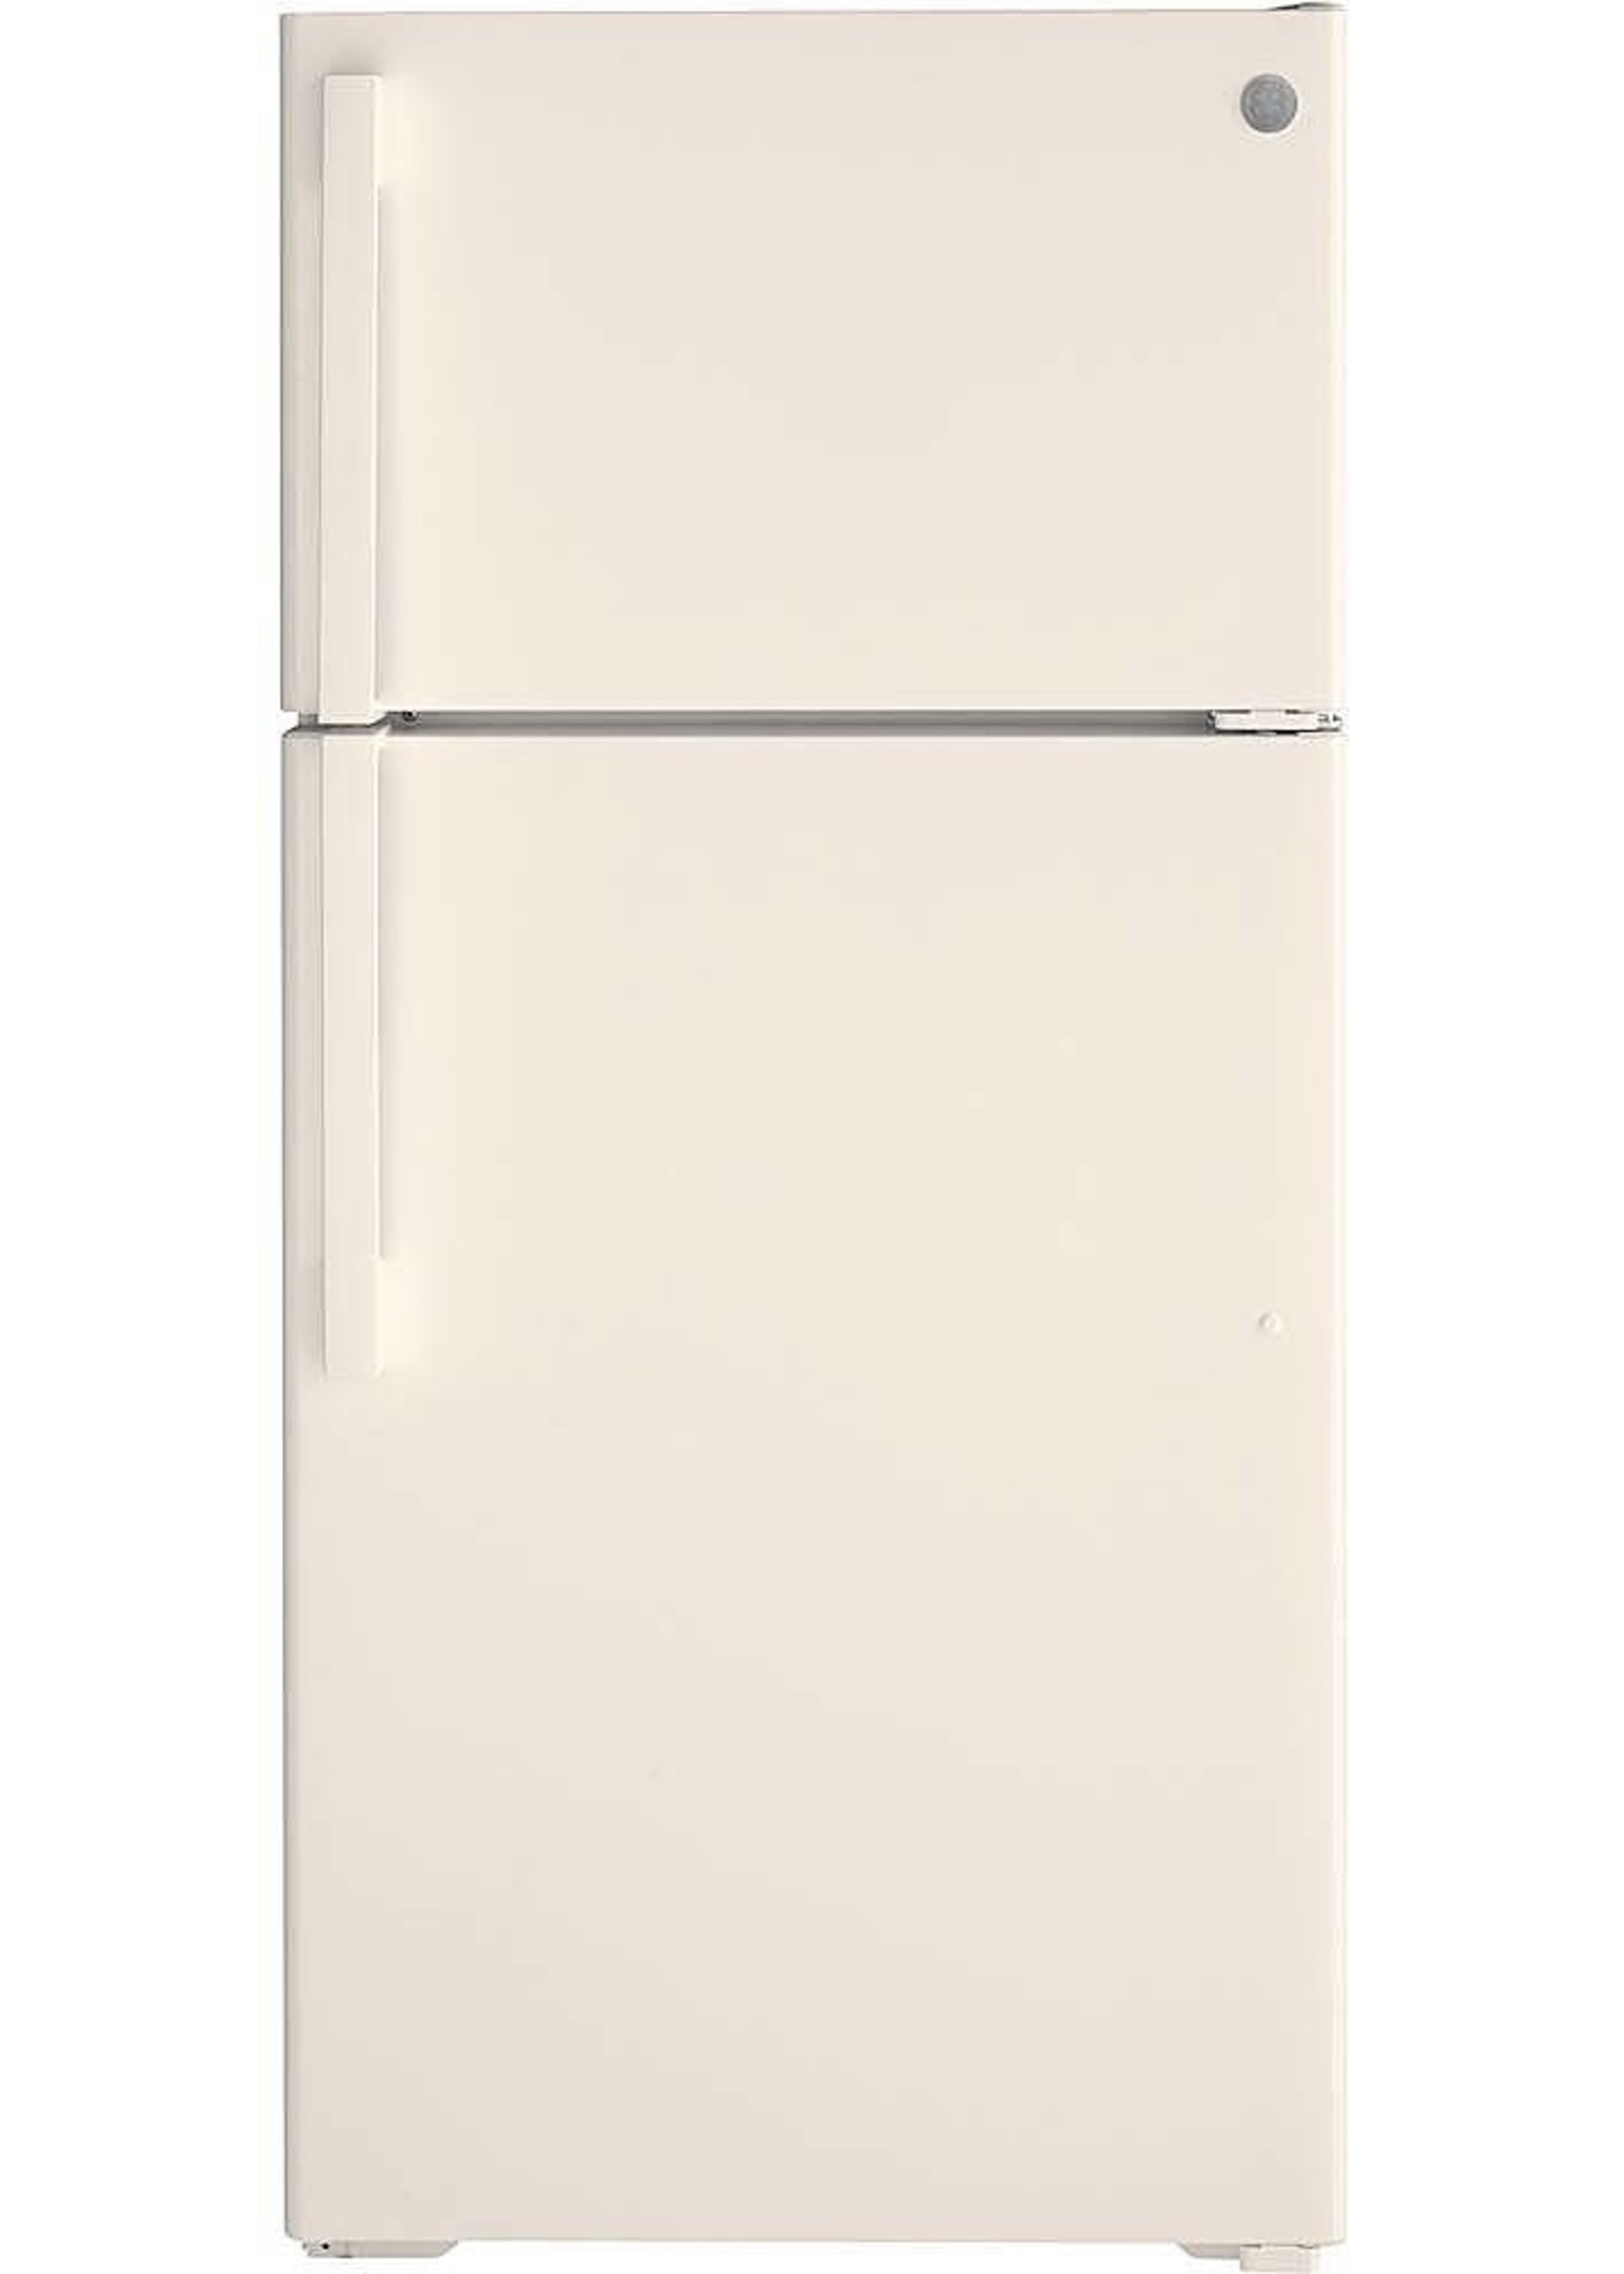 * GE GTE16DTNRCC  15.6 cu. ft. Top Freezer Refrigerator in Bisque, ENERGY STAR